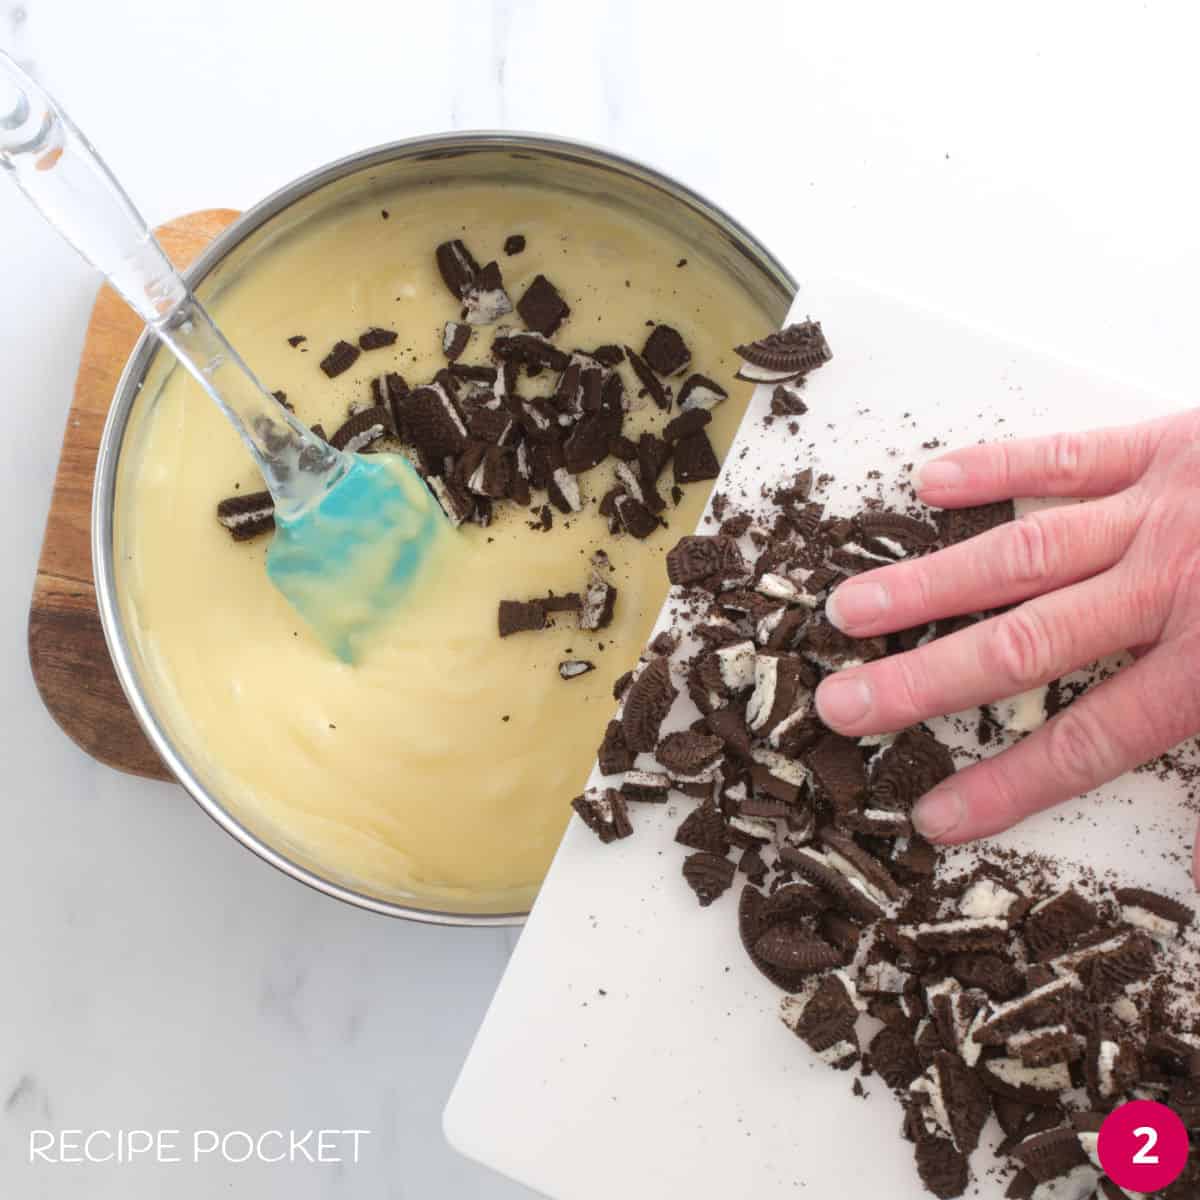 Crushed Oreo cookies being placed into melted chocolate.